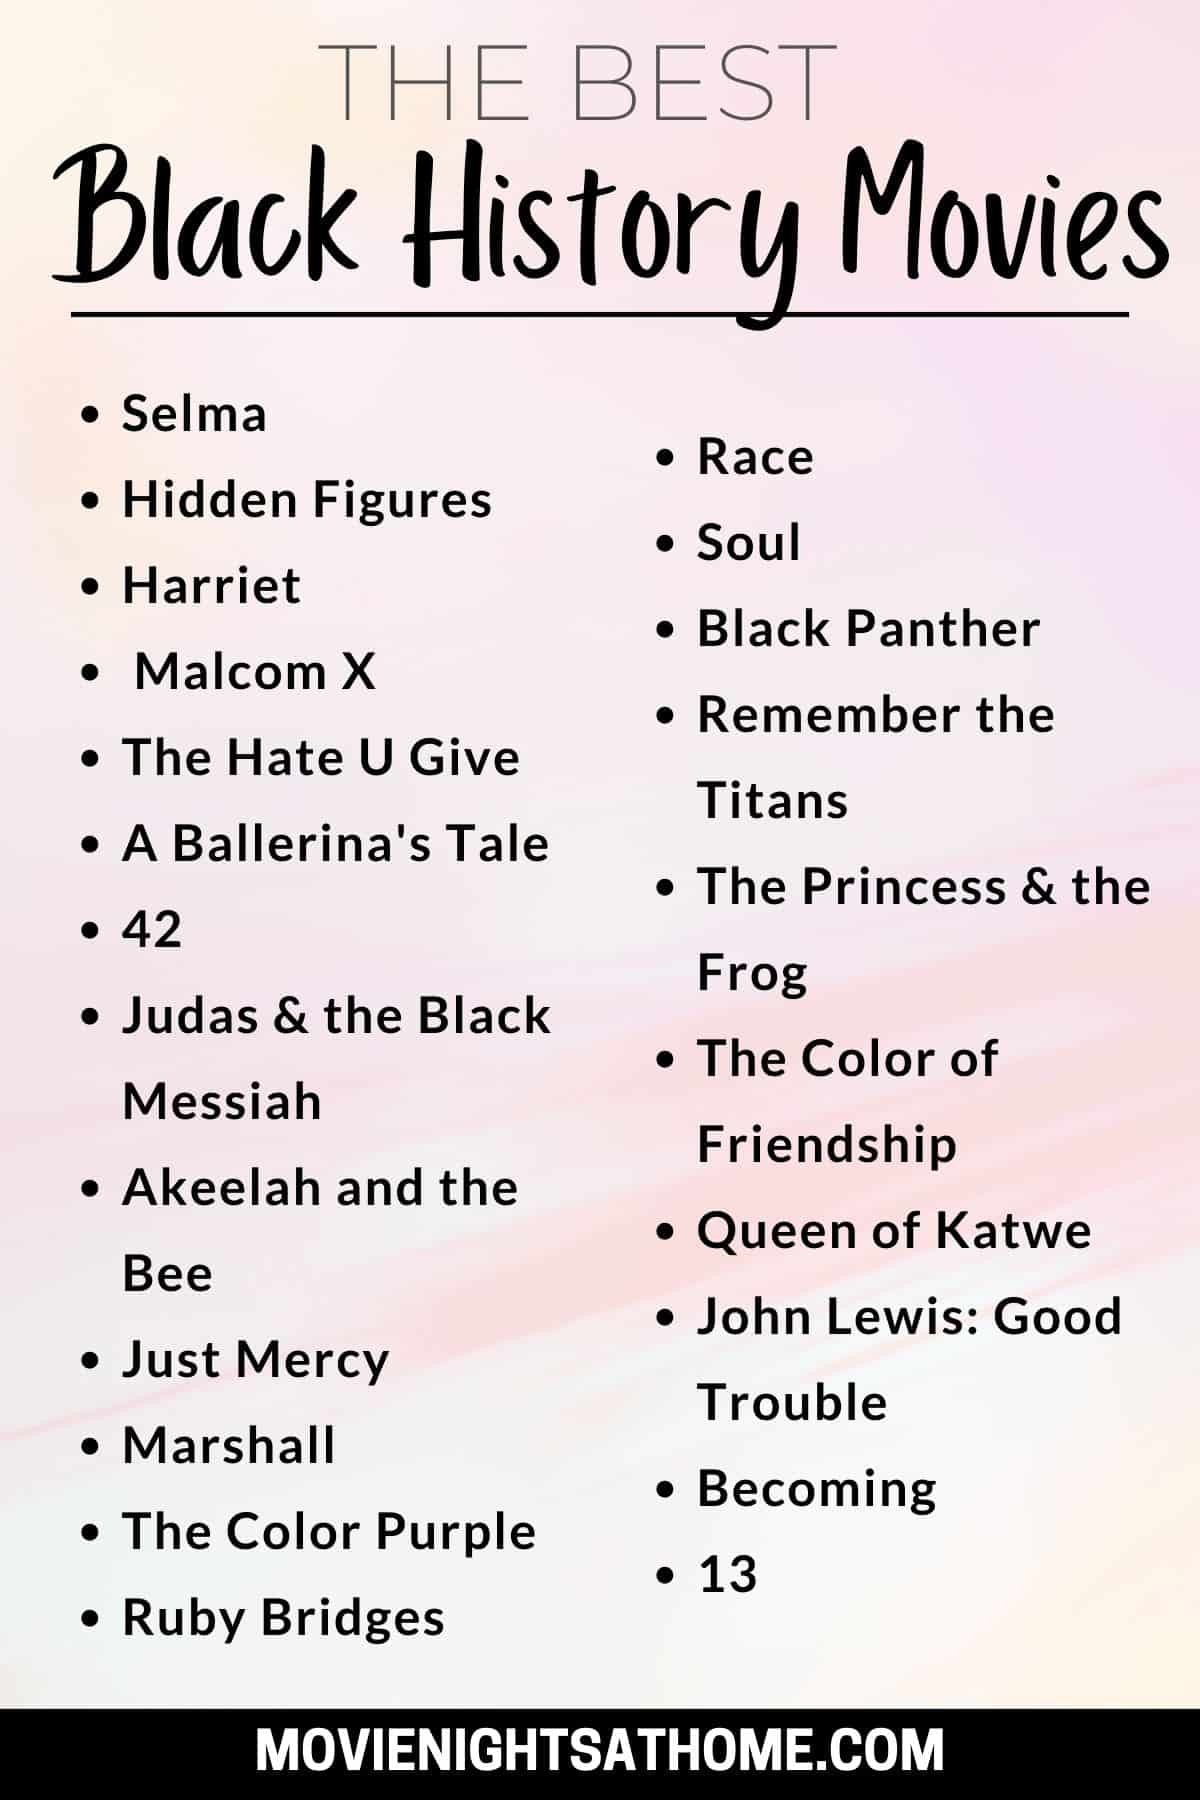 list of best black history movies for kids teens and adults - infographic